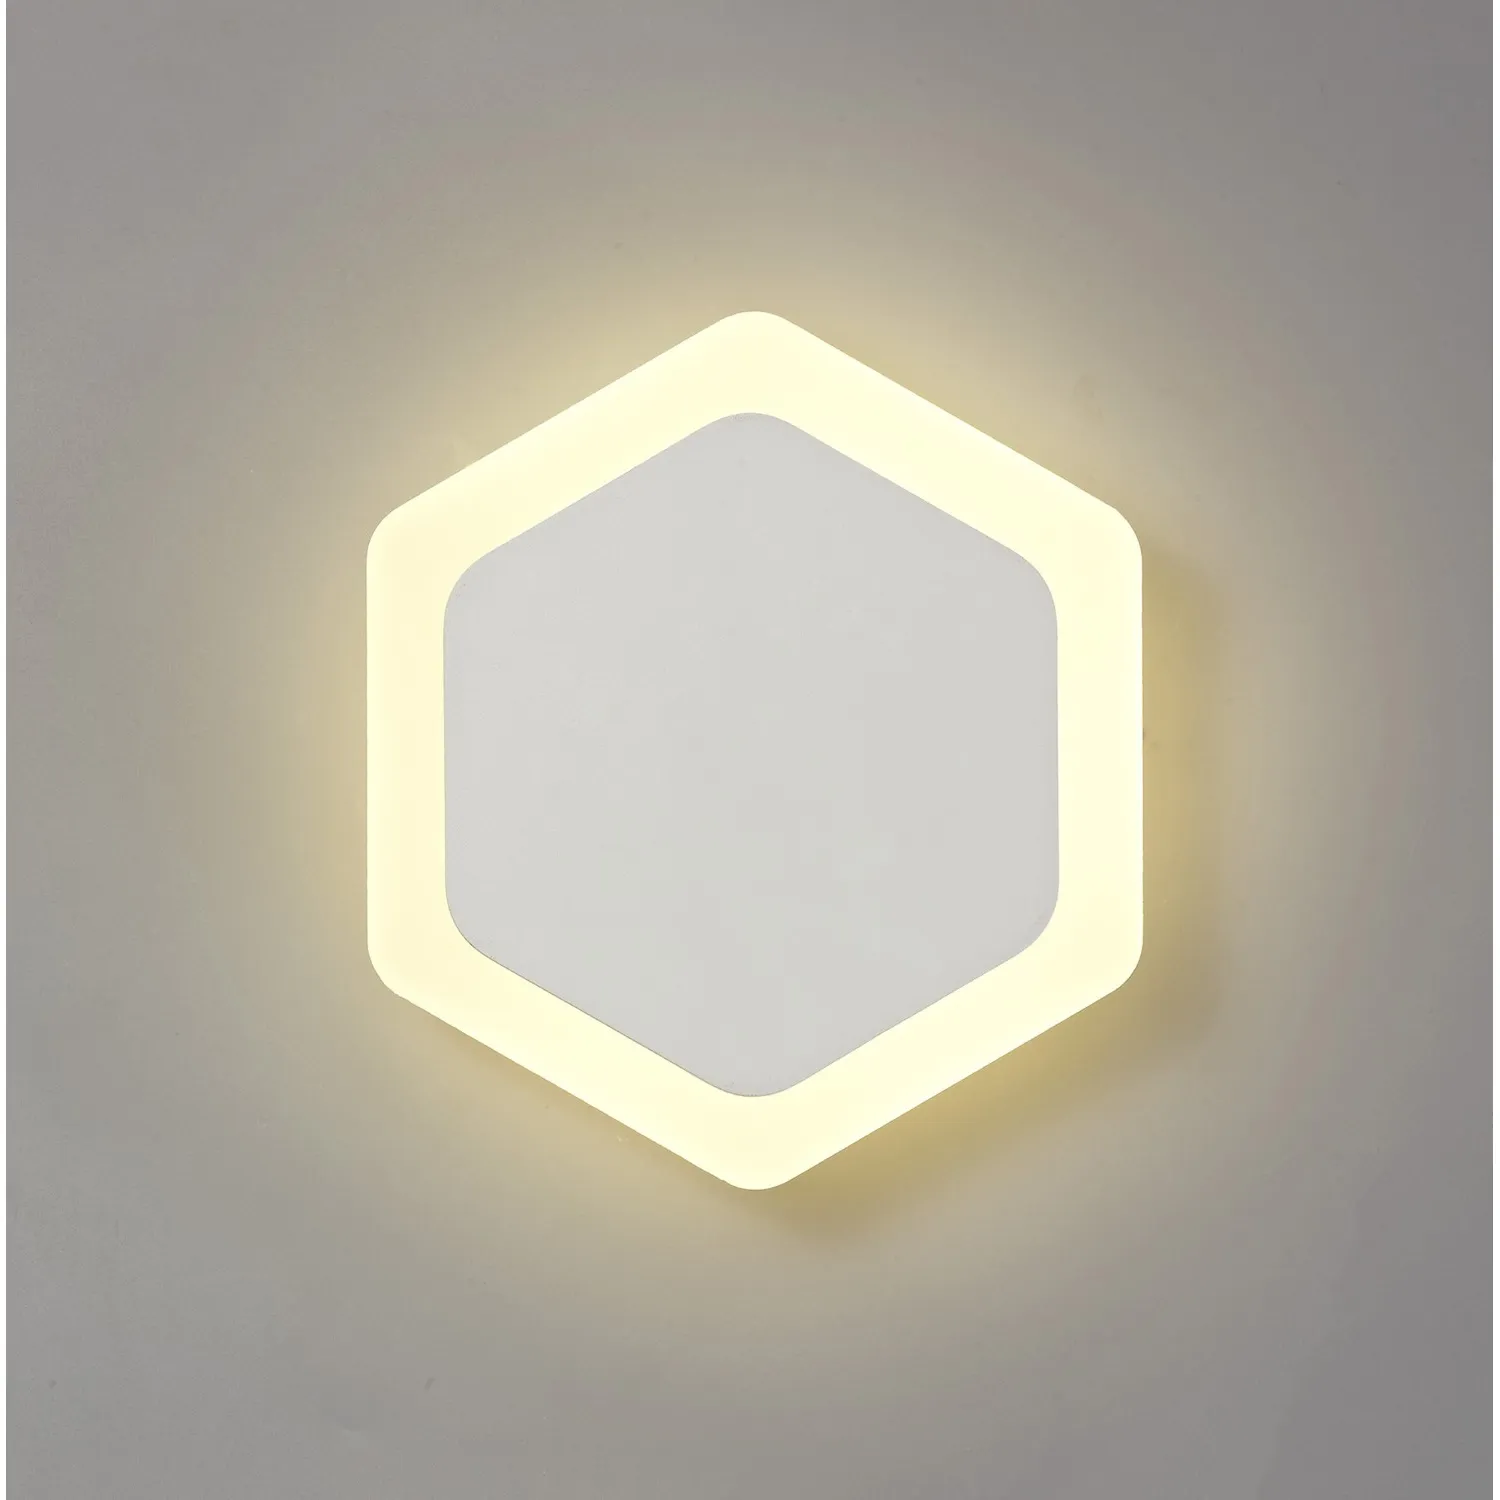 Edgware Magnetic Base Wall Lamp, 12W LED 3000K 498lm, 15 19cm Vertical Hexagonal Centre, Sand White Acrylic Frosted Diffuser